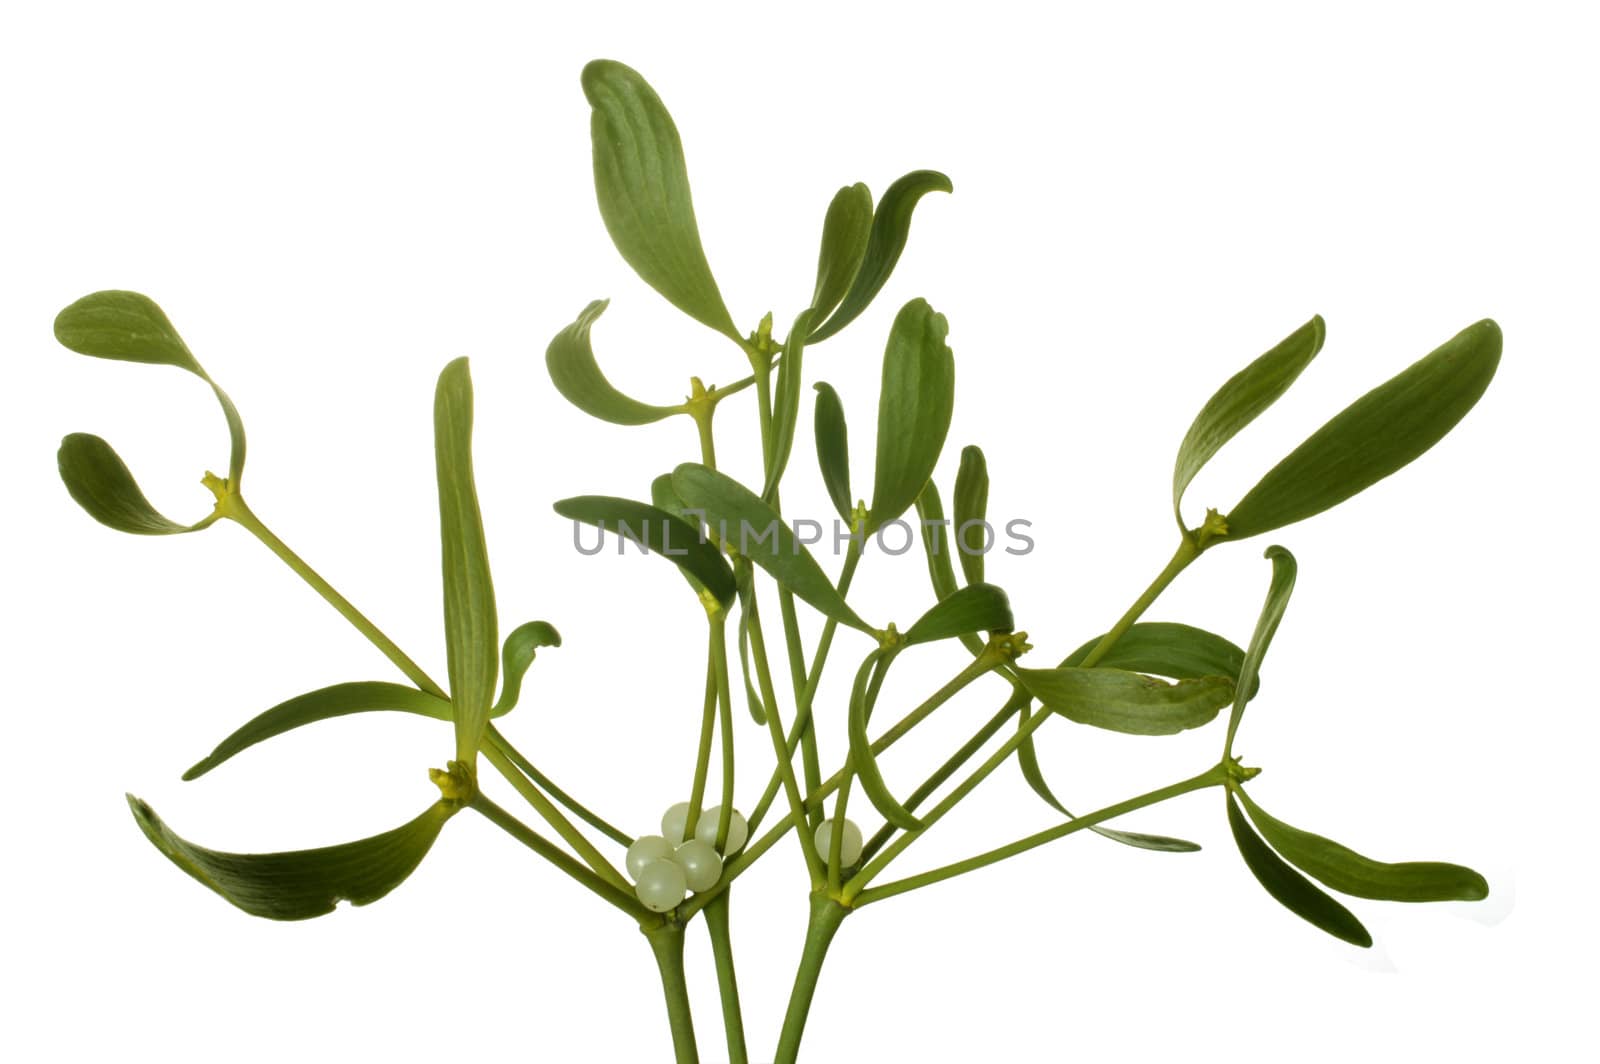 Close-up of a bunch of mistletoe (Viscum album) with berries, isolated on a white background